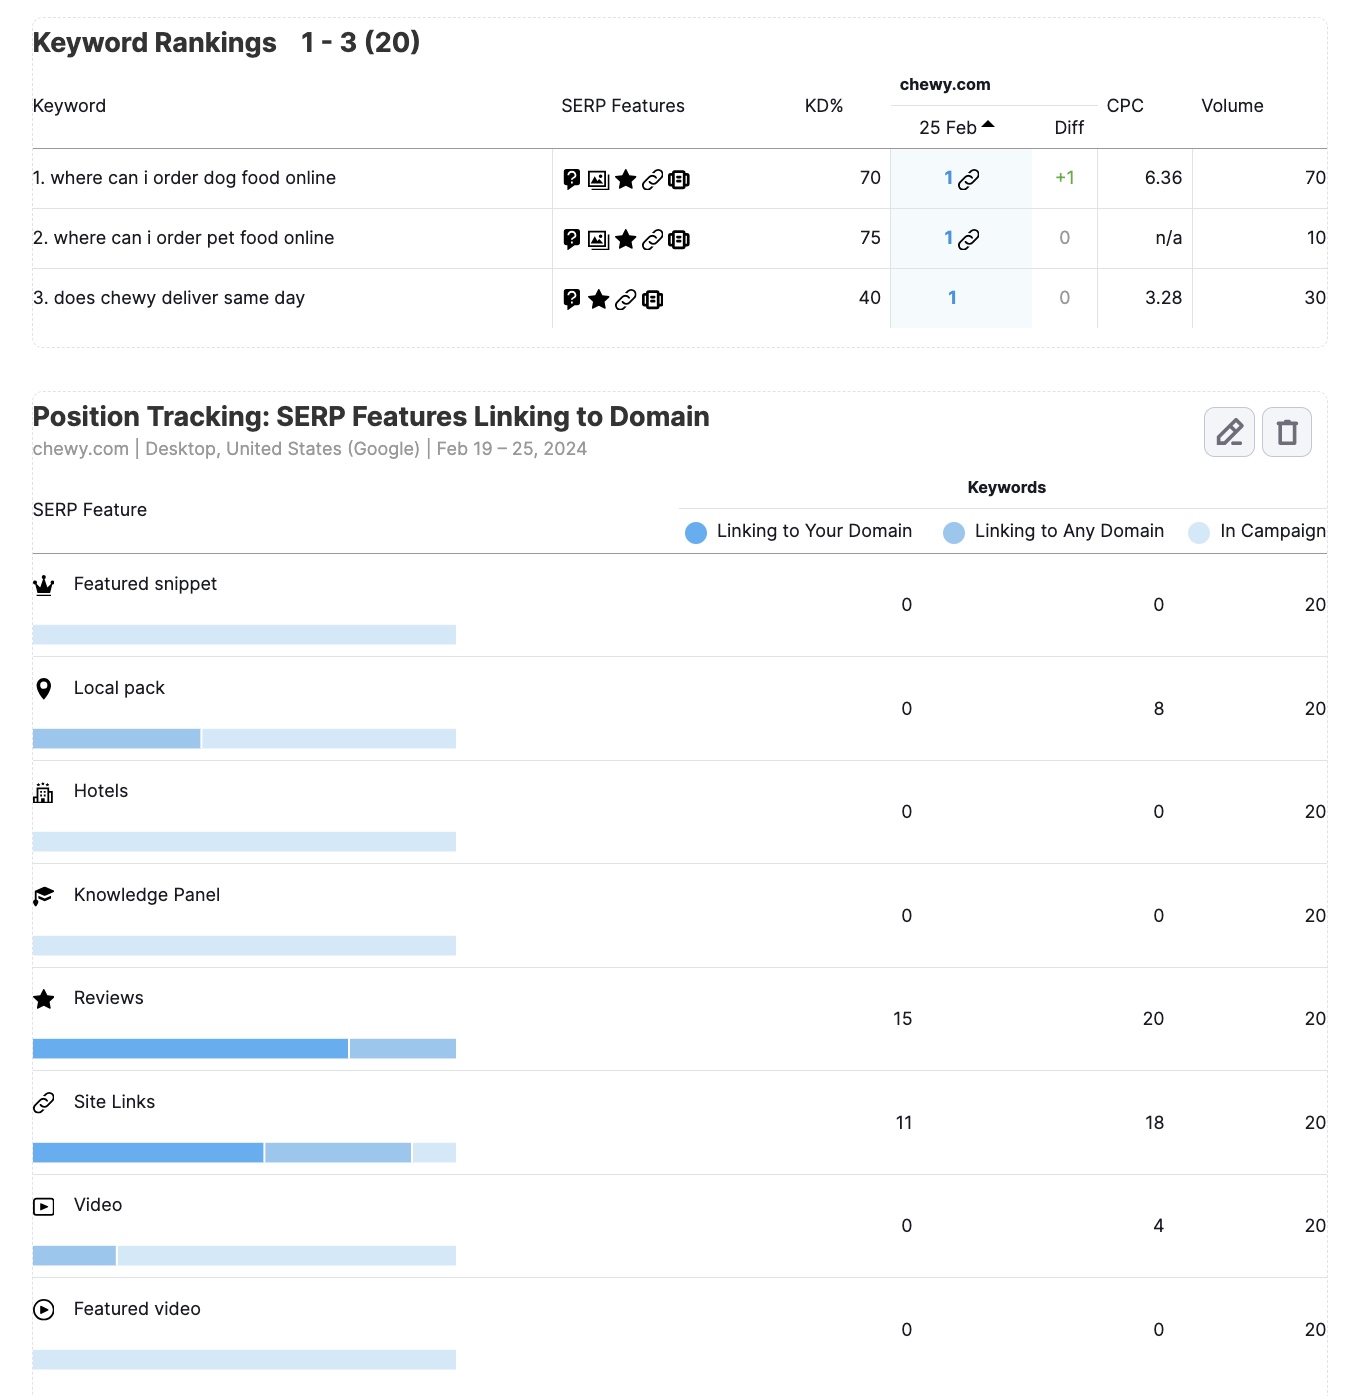 A report in Semrush's My Reports combining keyword rankings, and SERP features linking to domain